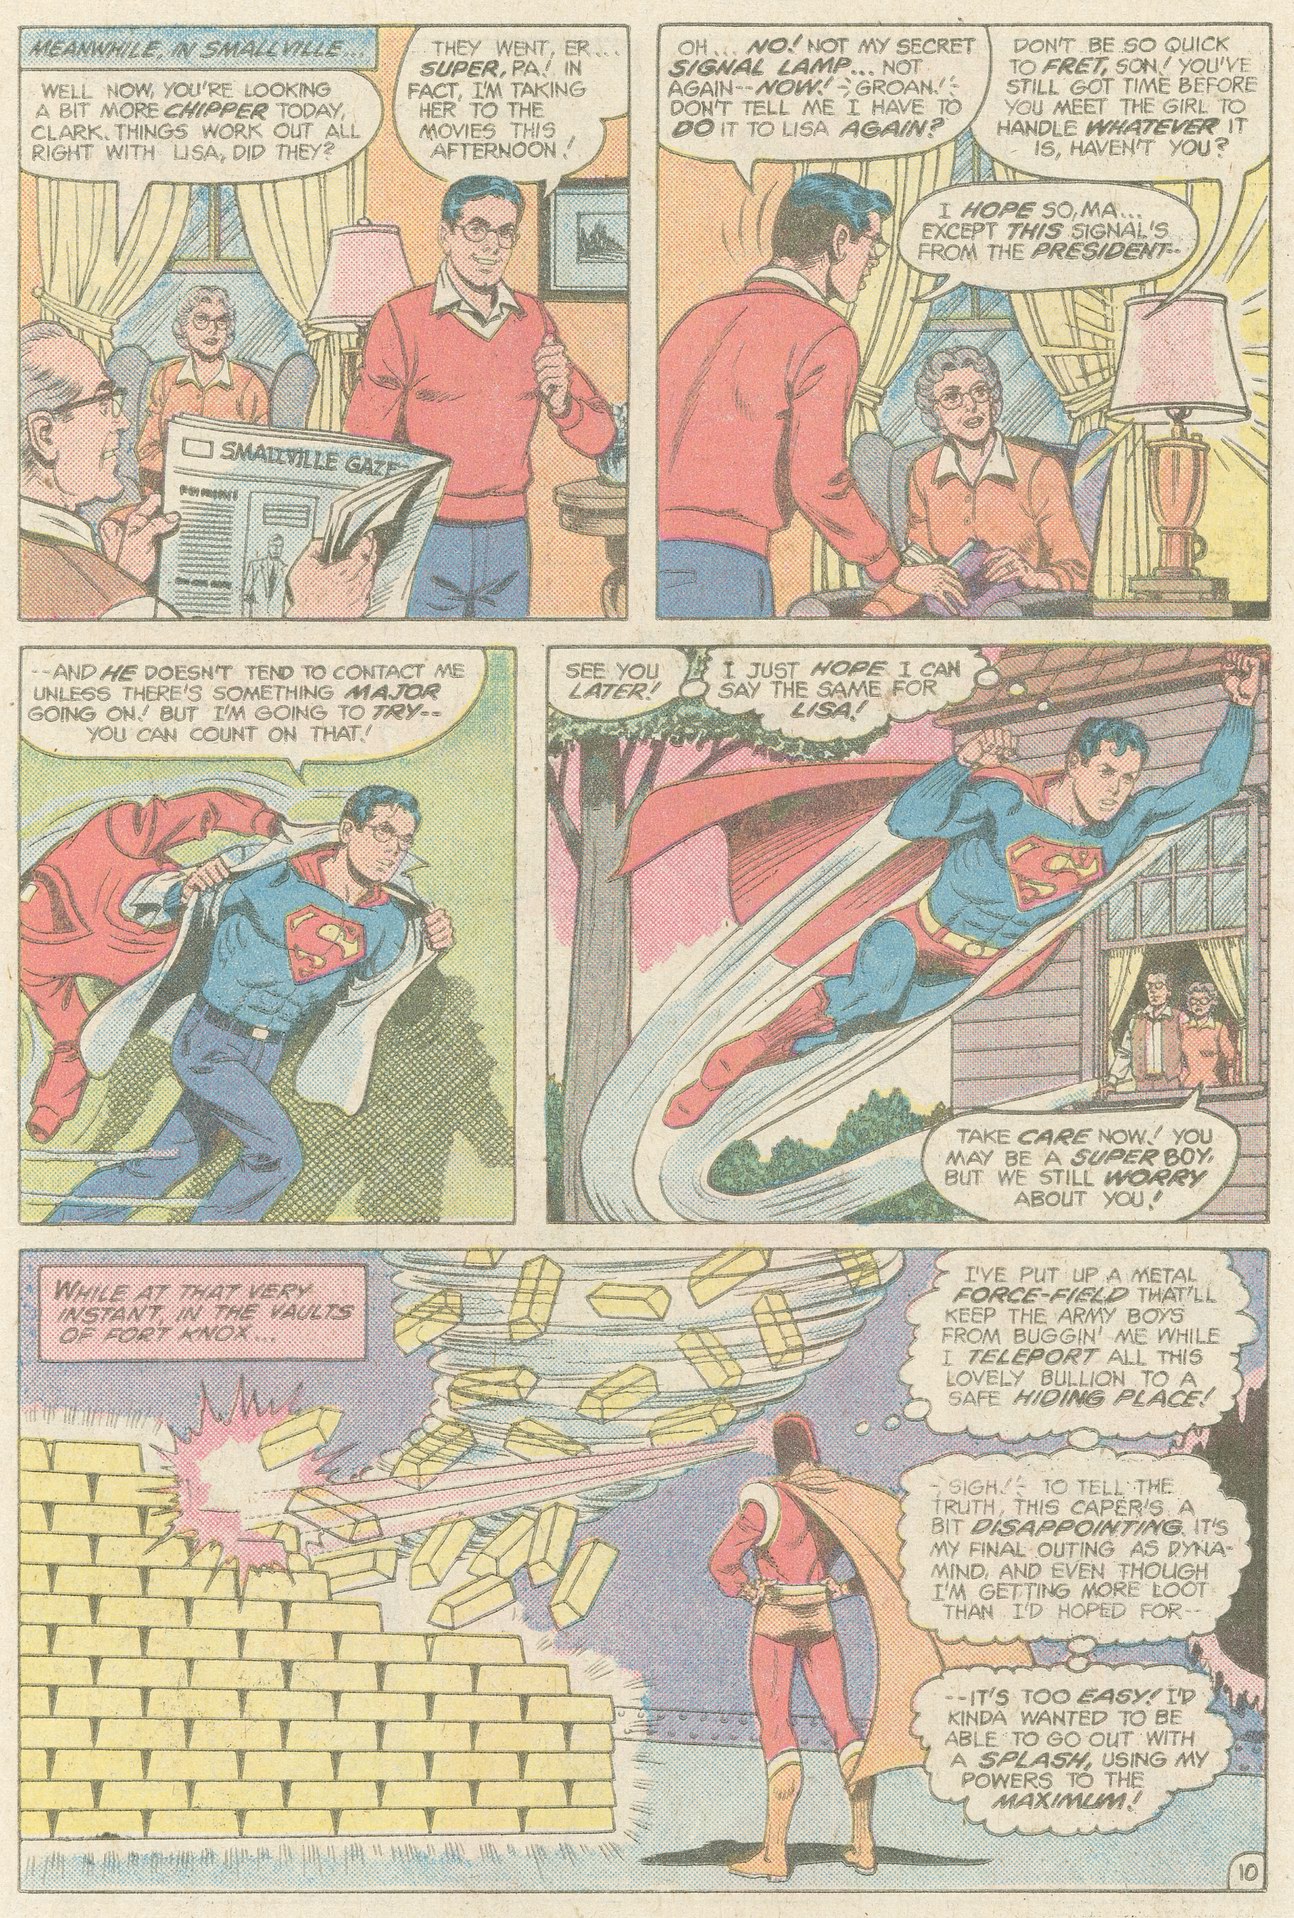 The New Adventures of Superboy 43 Page 10